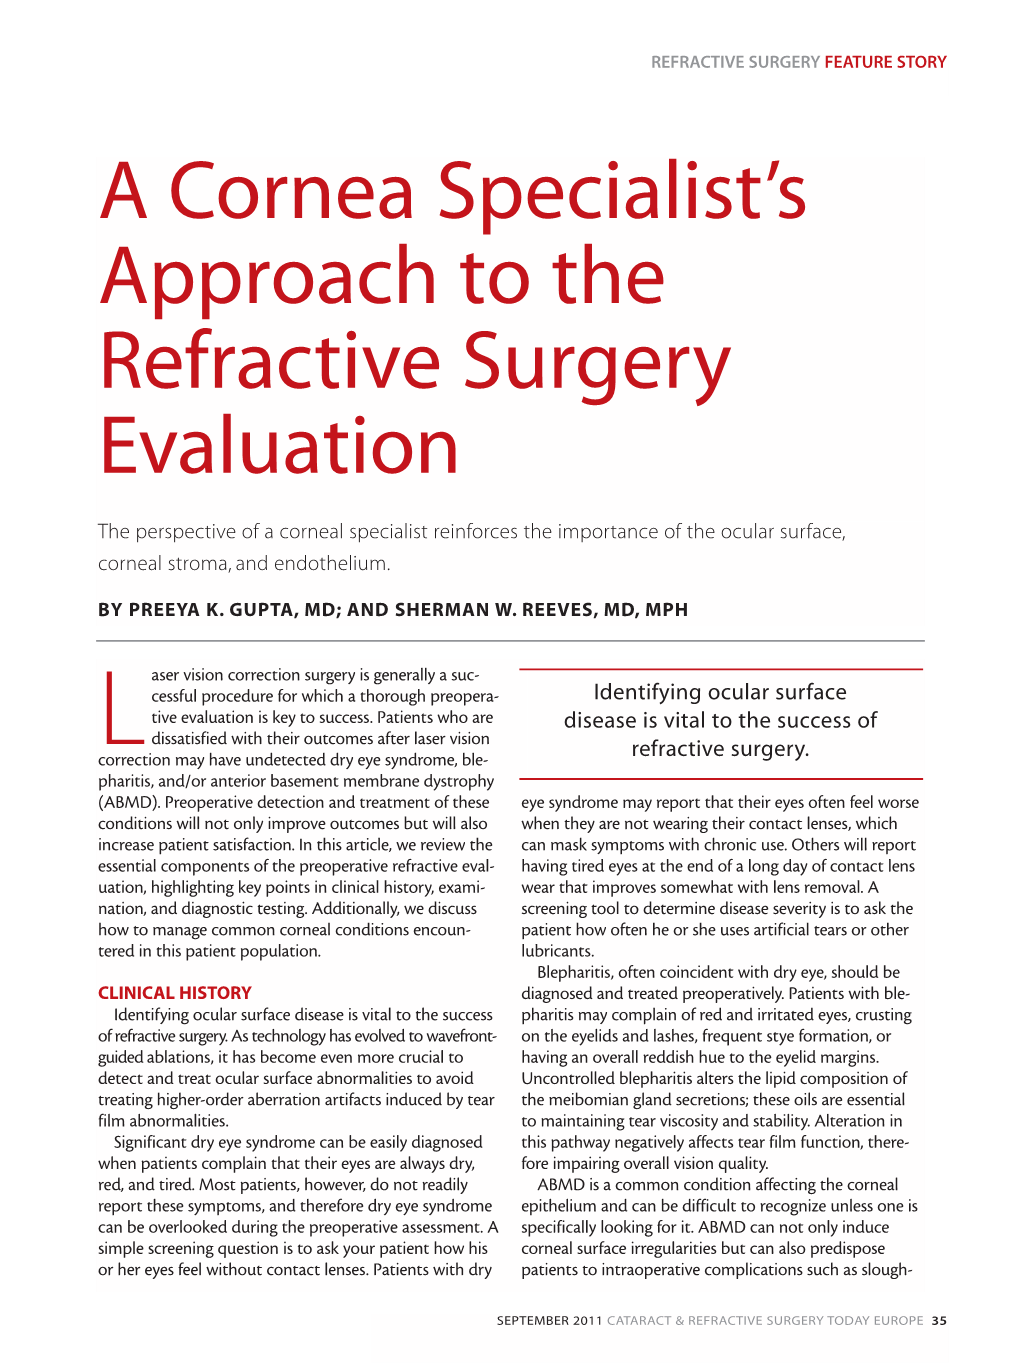 A Cornea Specialist's Approach to the Refractive Surgery Evaluation